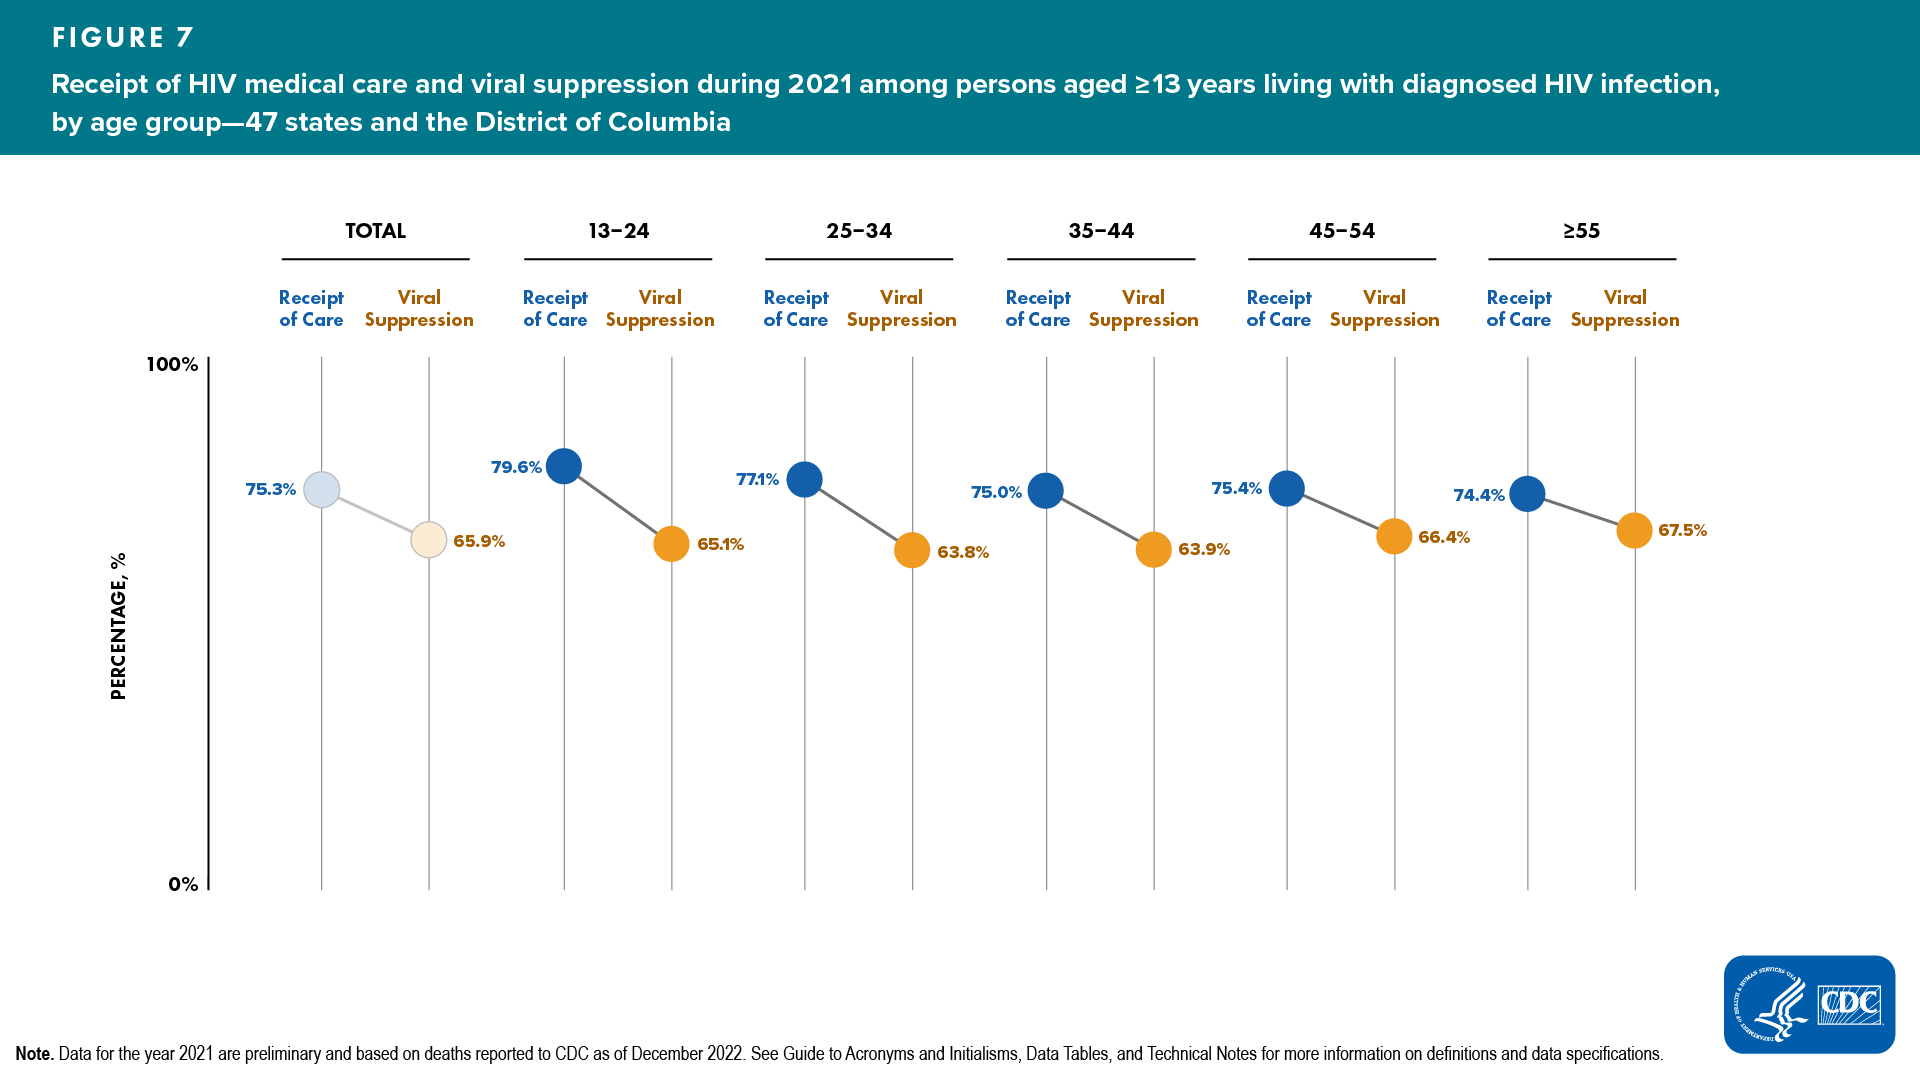 Figure 7. Receipt of HIV medical care and viral suppression during 2021 among persons aged ≥13 years living with diagnosed HIV infection, by age group — 47 states and the District of Columbia